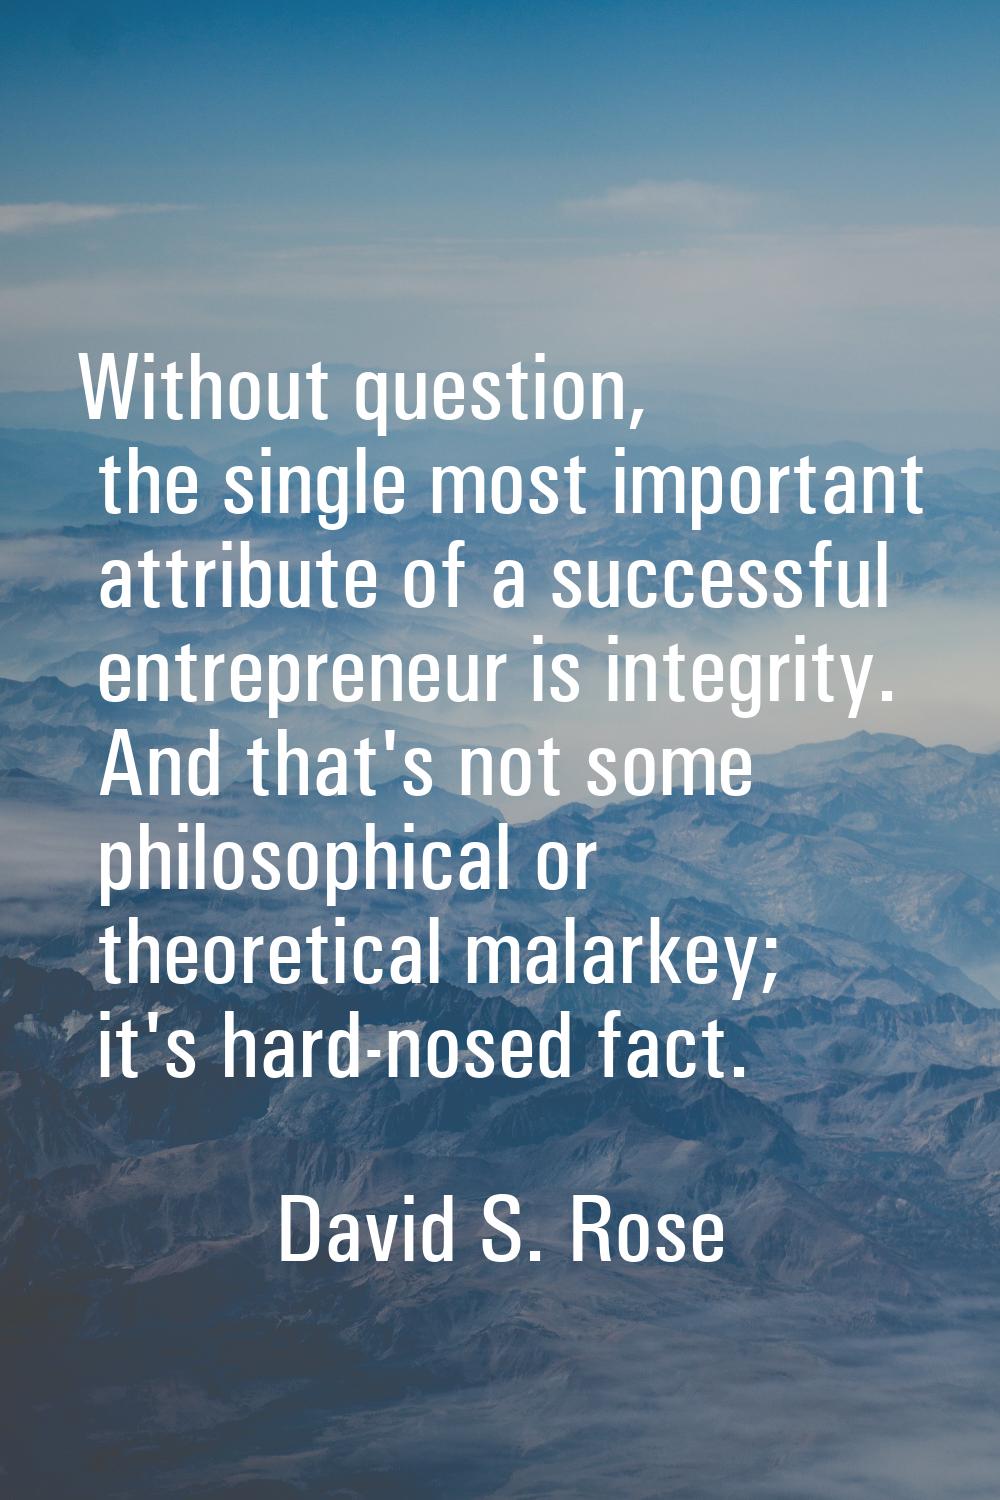 Without question, the single most important attribute of a successful entrepreneur is integrity. An